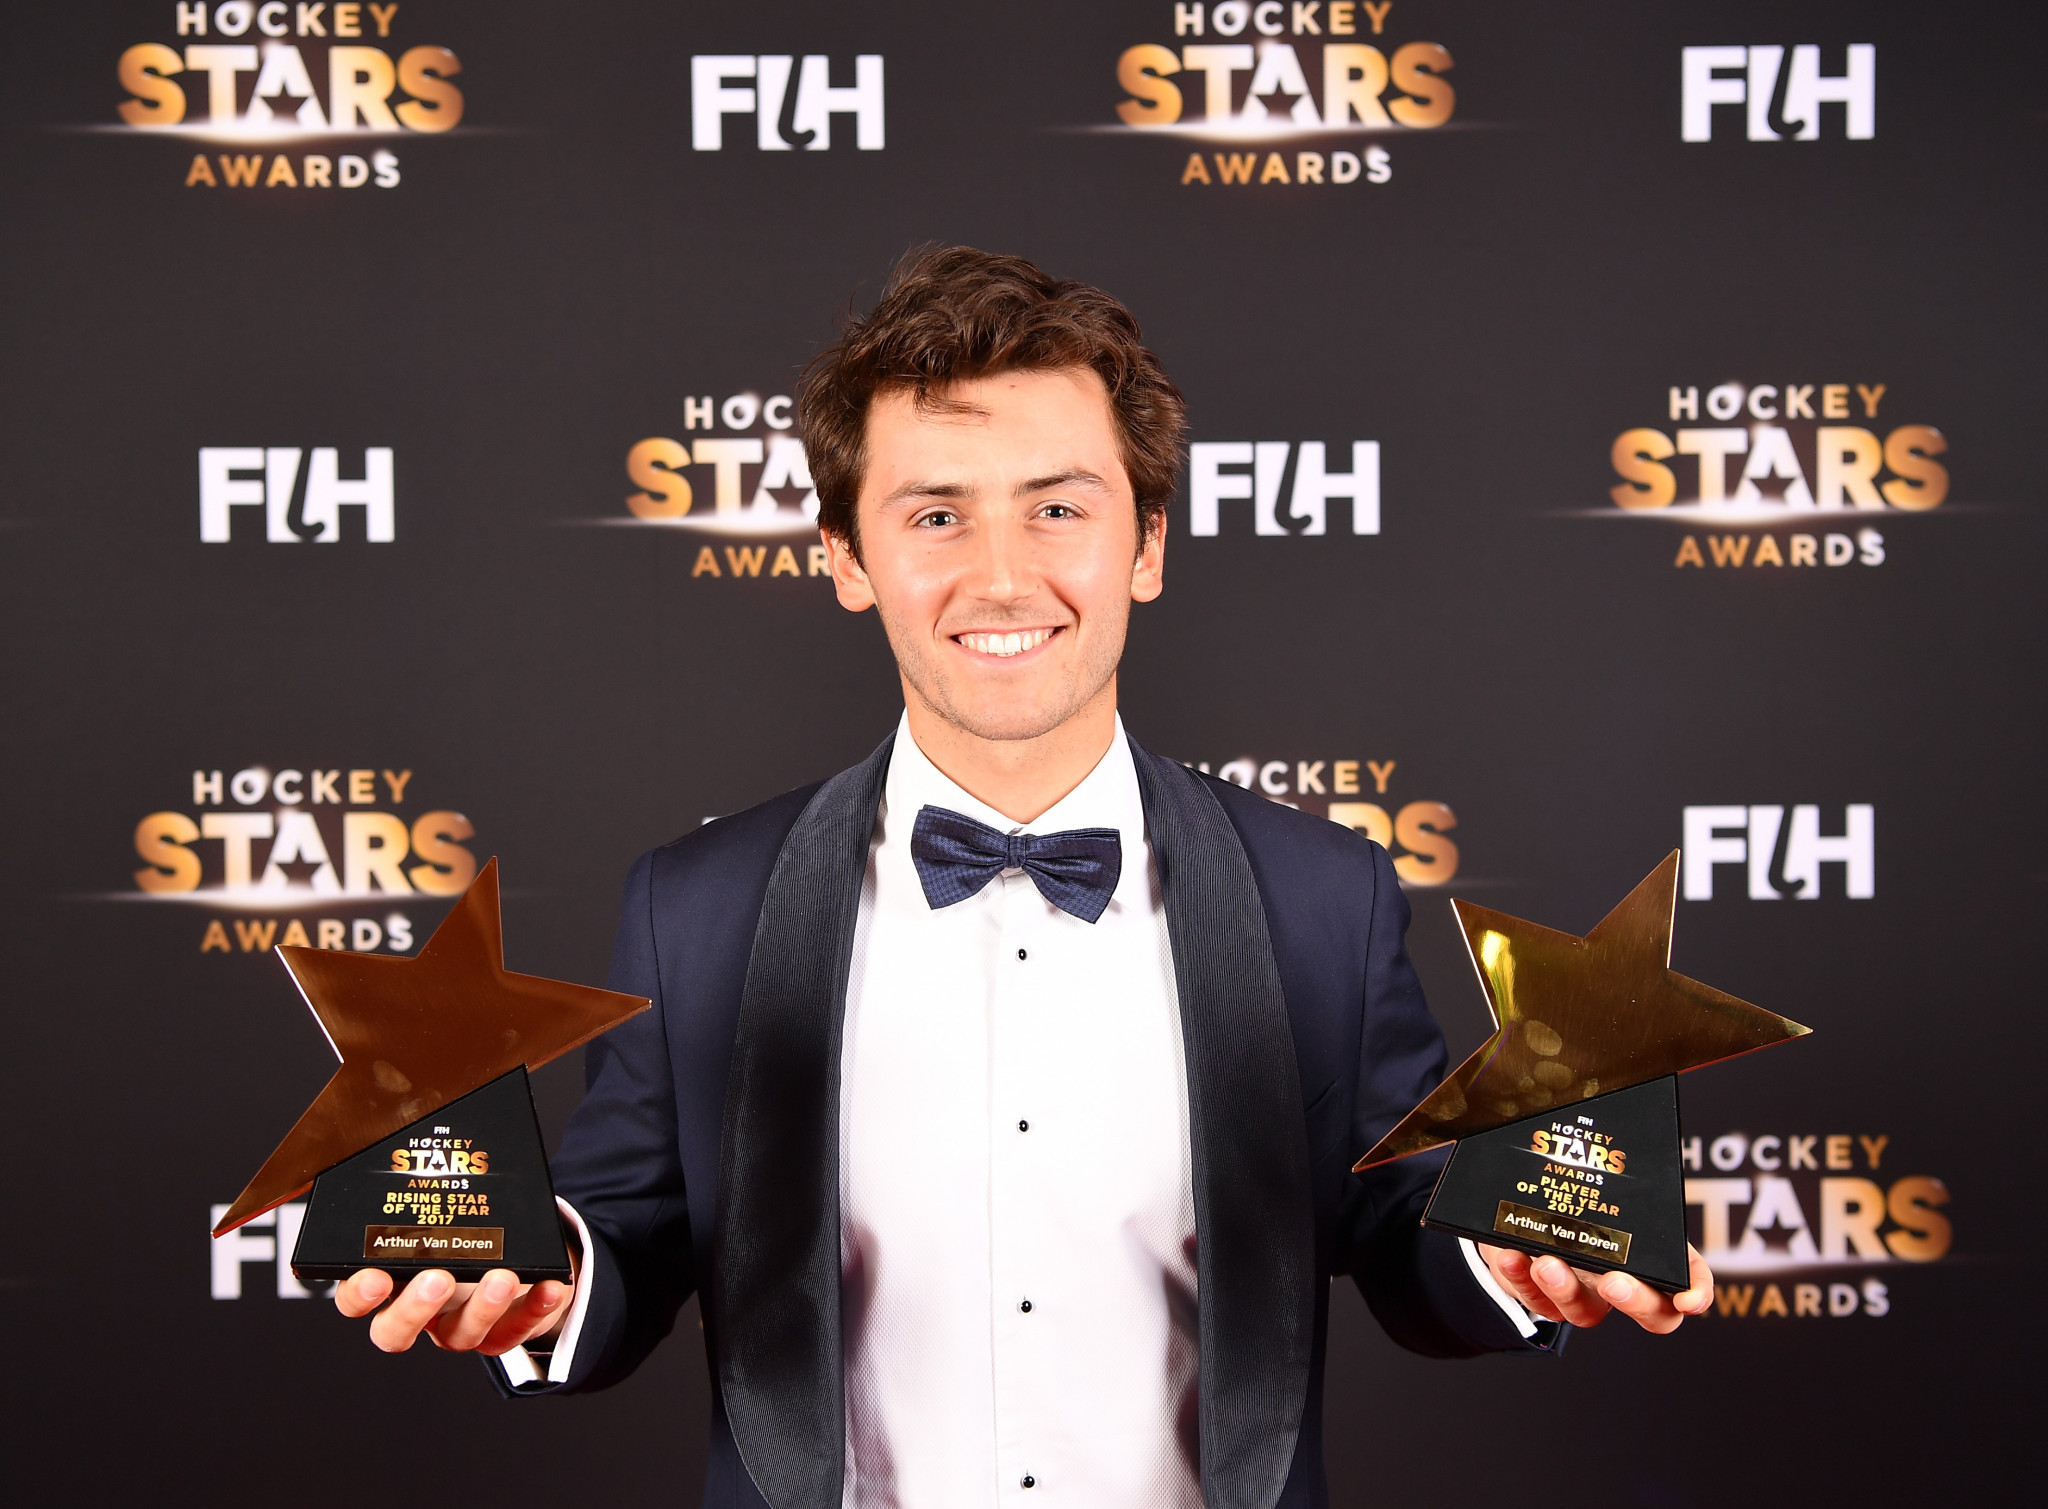 Belgium's Arthur Van Doren scooped two prizes at the FIH Hockey Stars awards ©Getty Images